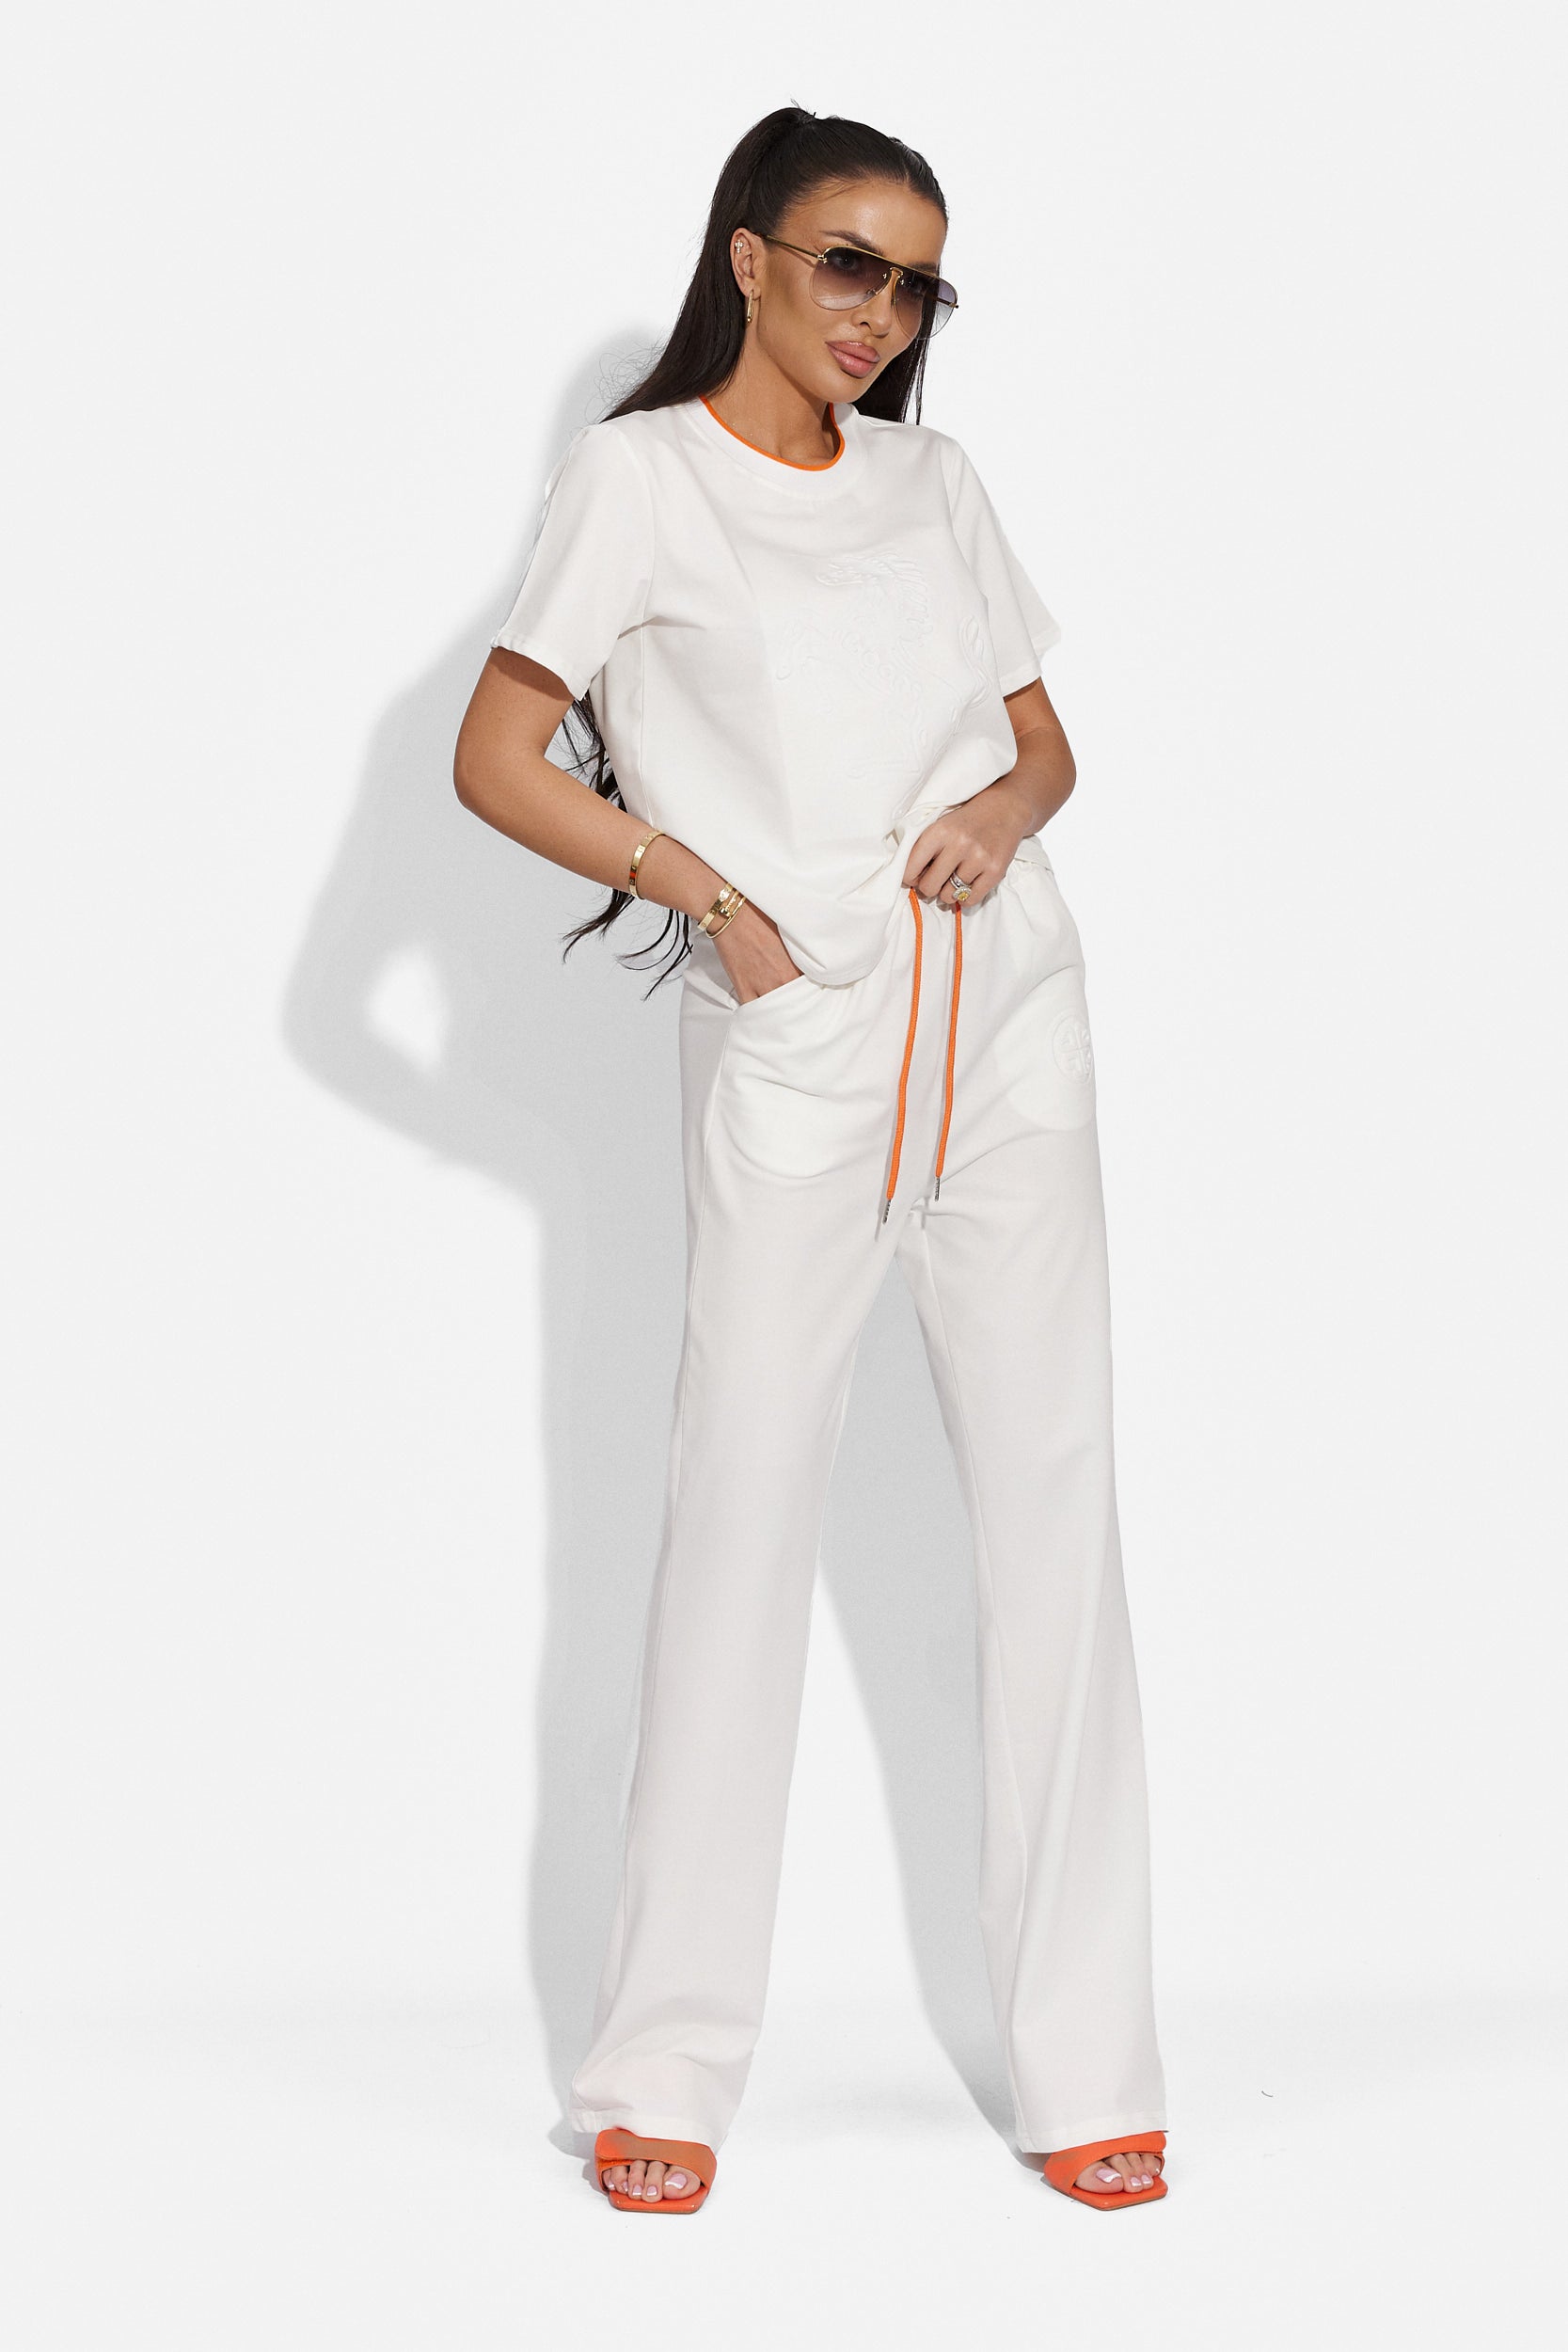 Giovana Bogas casual white lady's tracksuit